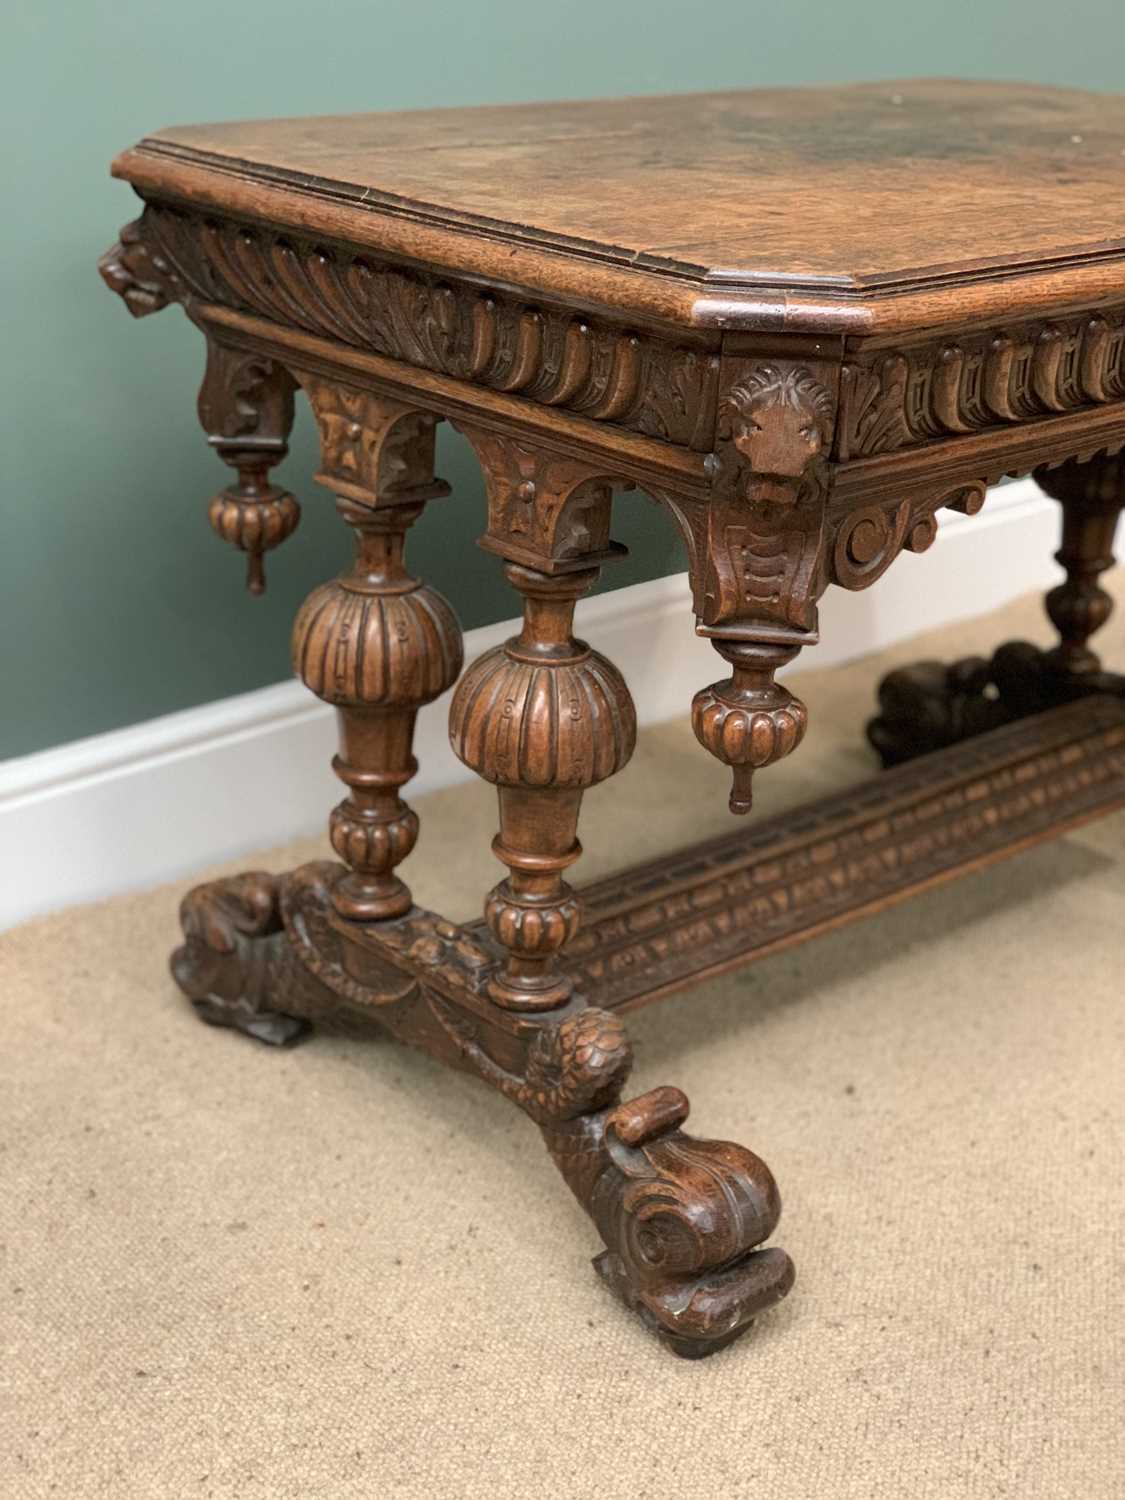 RENAISSANCE REVIVAL STYLE ANTIQUE CARVED OAK LIBRARY TABLE with lion mask detail and single drawer - Image 4 of 5